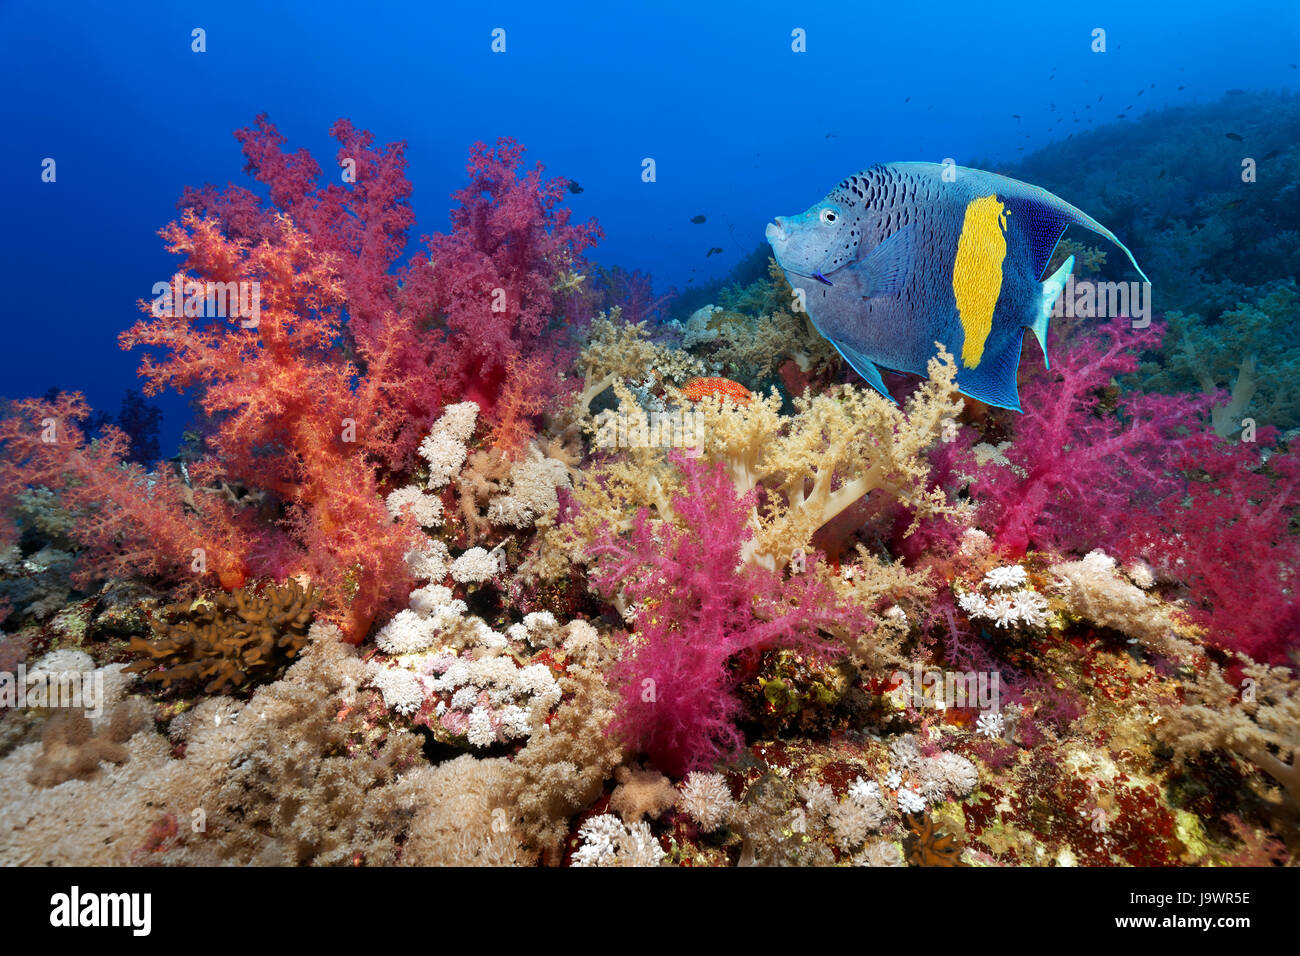 Halfmoon angelfish (Pomacanthus maculosus) swimming over coral reef with many soft corals (Dendronephthya klunzingeri), red Stock Photo